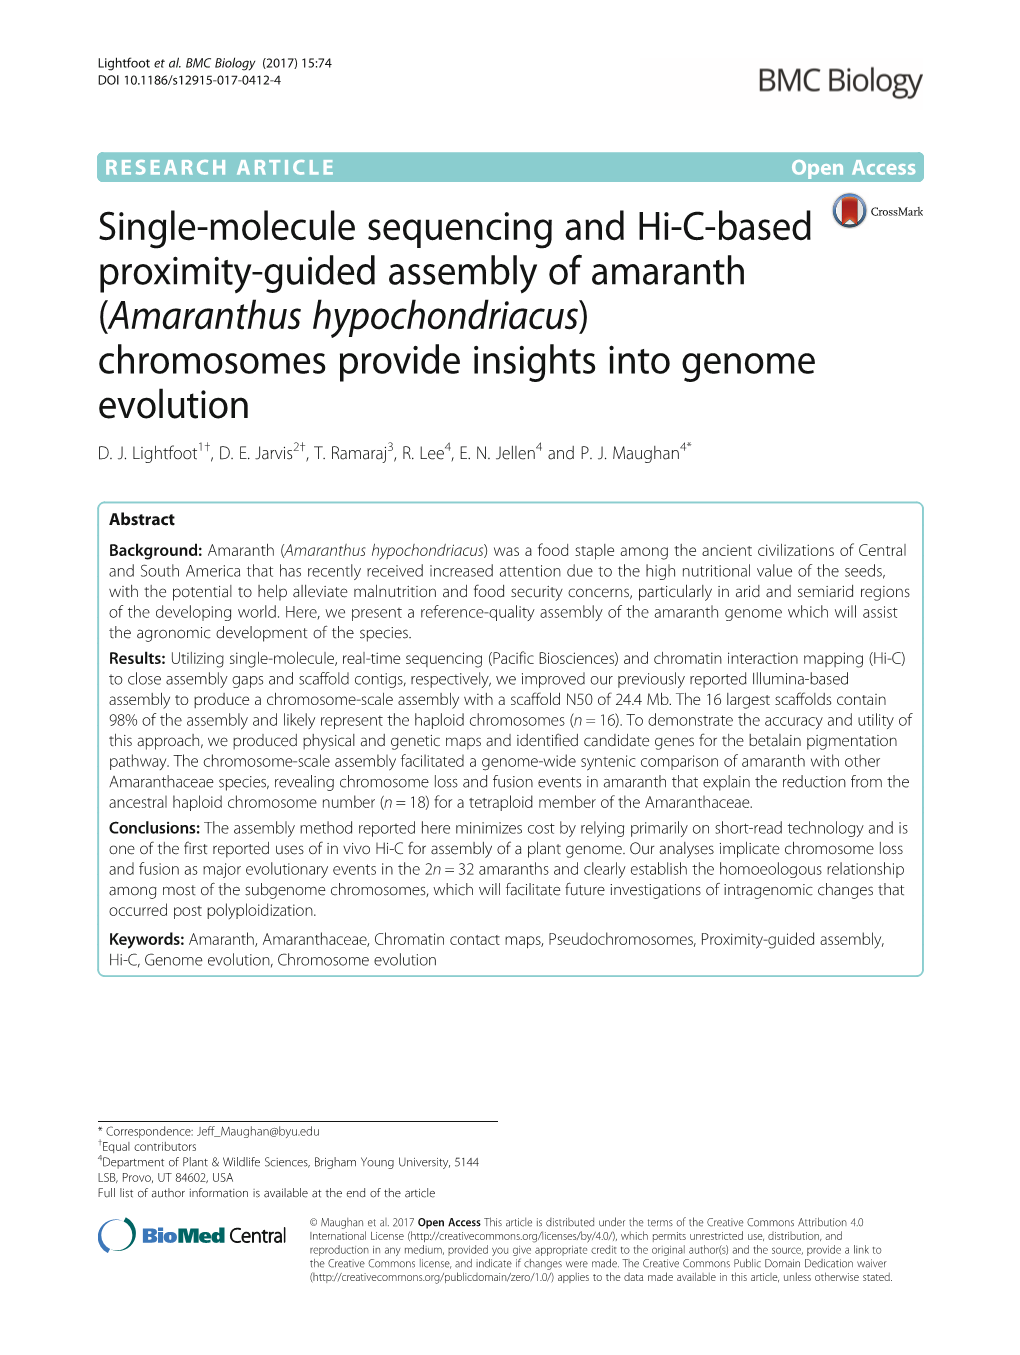 Single-Molecule Sequencing and Hi-C-Based Proximity-Guided Assembly of Amaranth (Amaranthus Hypochondriacus) Chromosomes Provide Insights Into Genome Evolution D